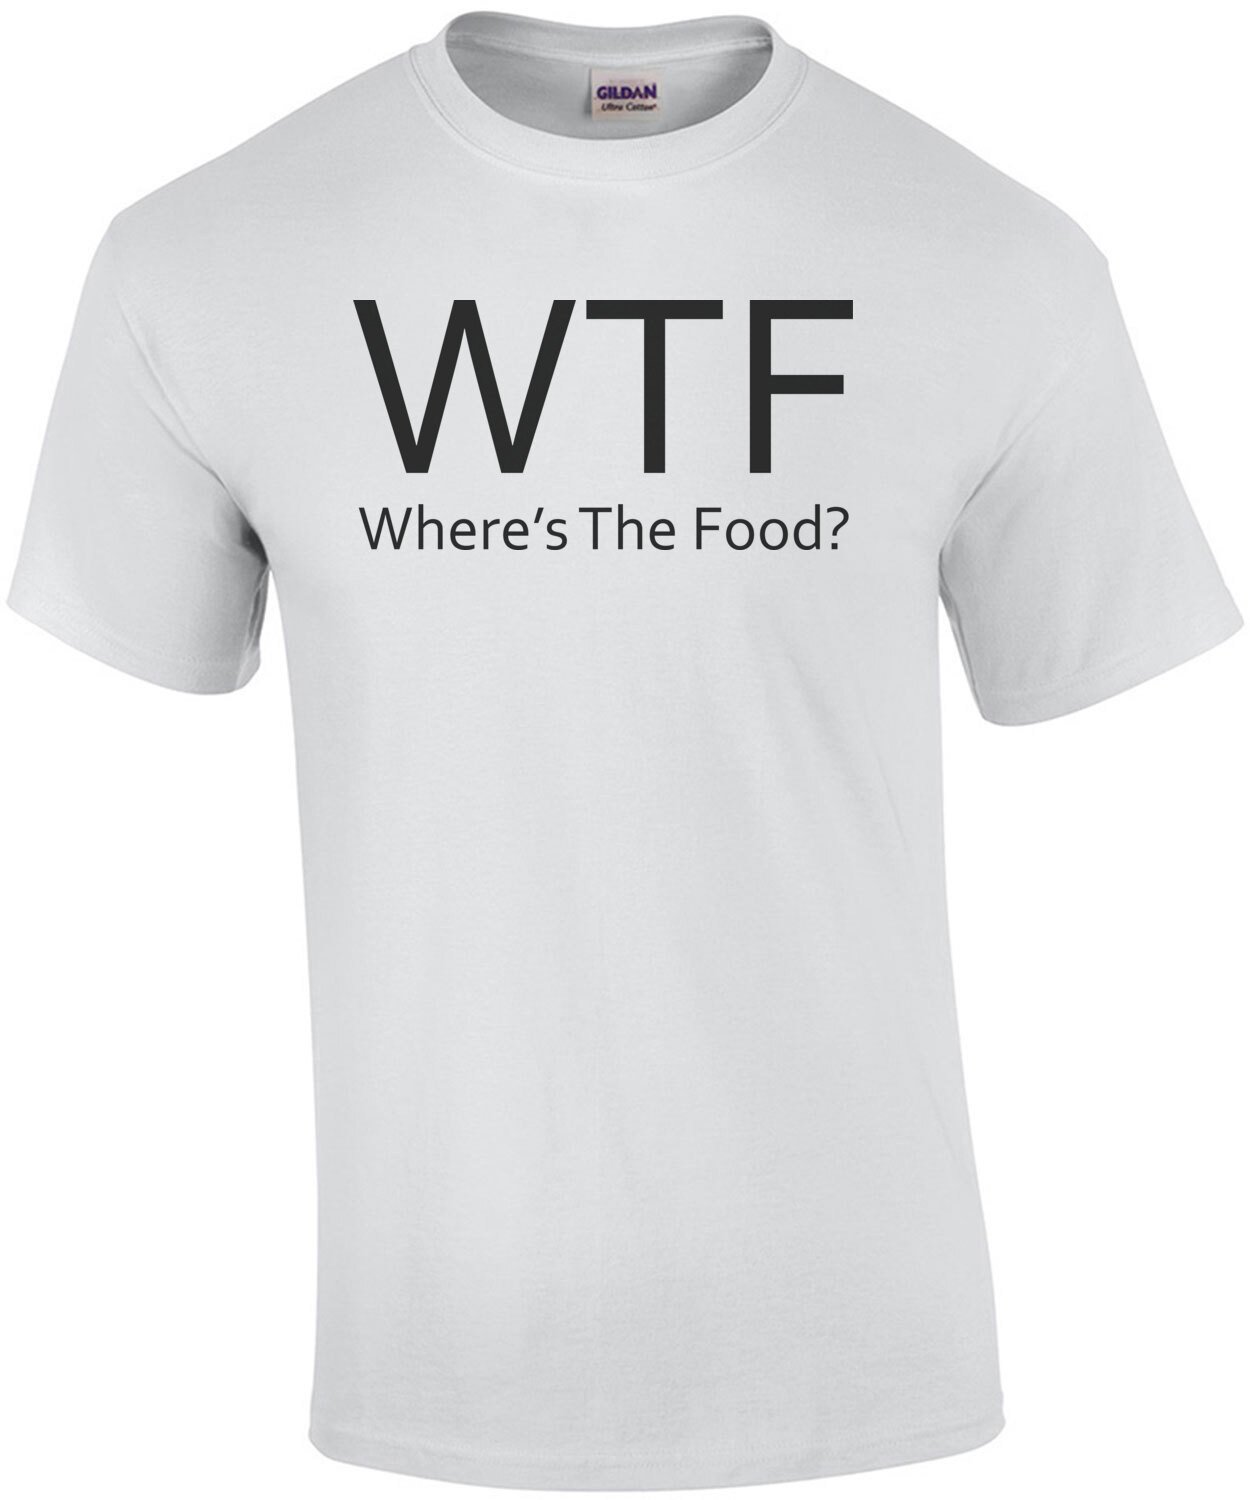 WTF - Where's The Food - Funny Fat Guy T-Shirt